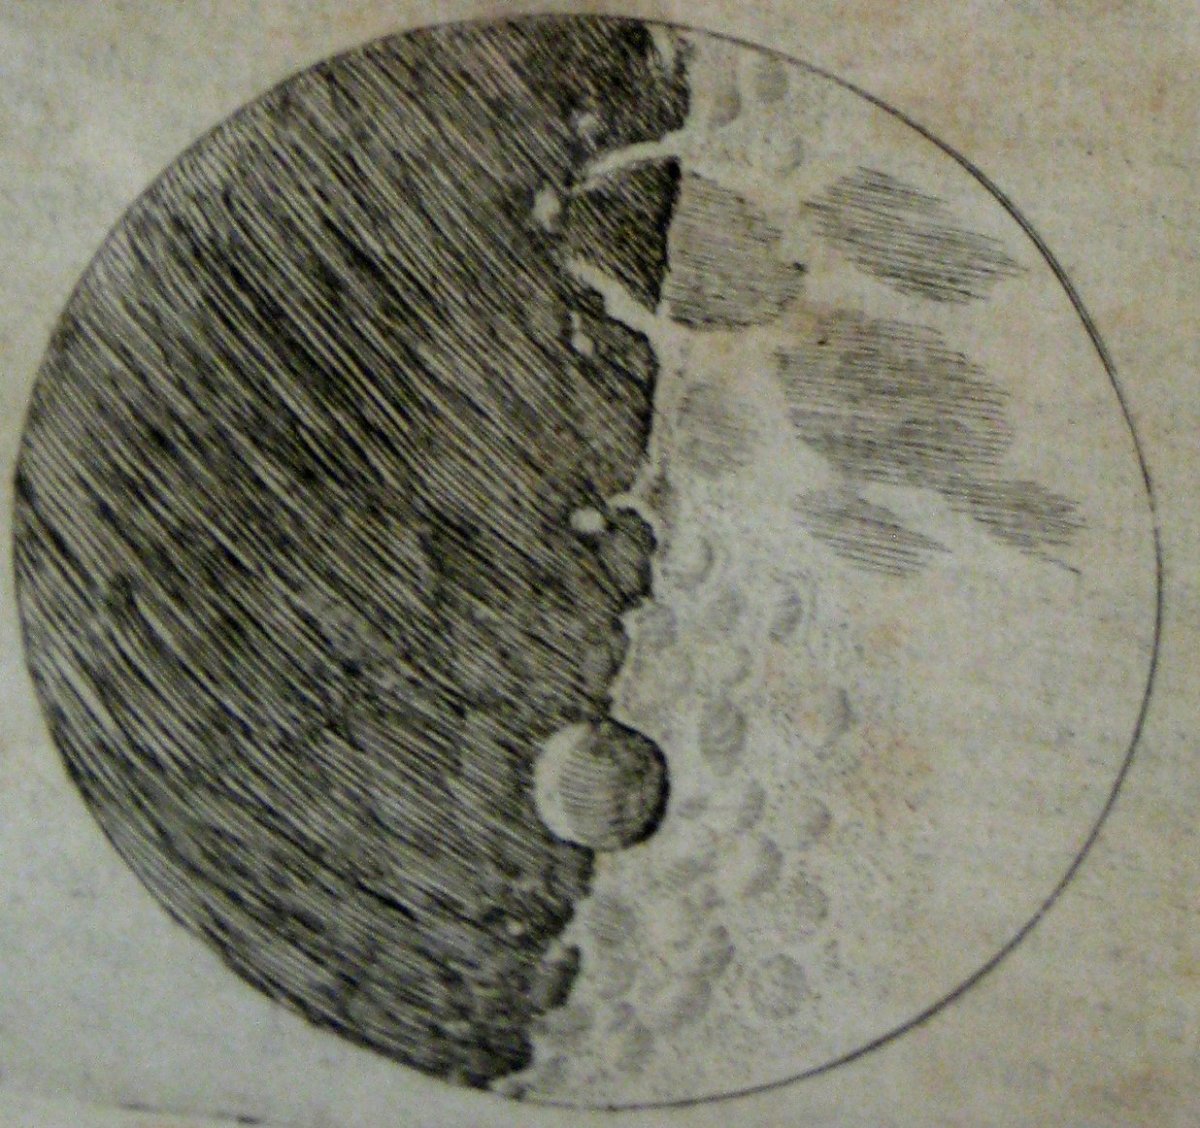 One of Galileo’s drawings of the Moon, c. 1610.